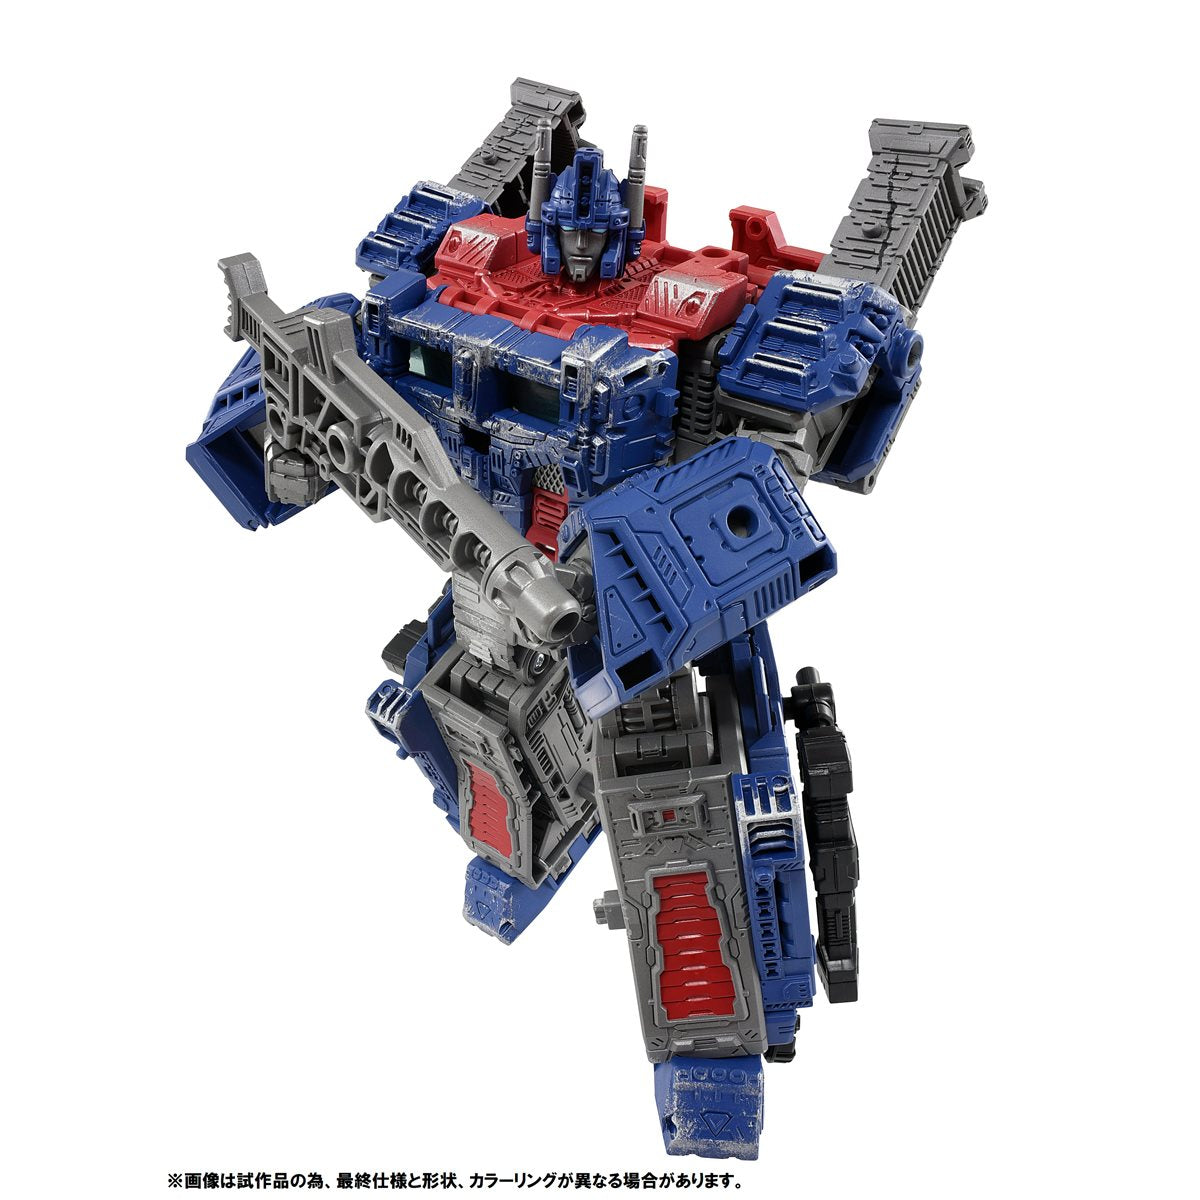 Transformers Premium Finish War for Cybertron WFC-03 Leader Ultra Magnus Action Figure Toy